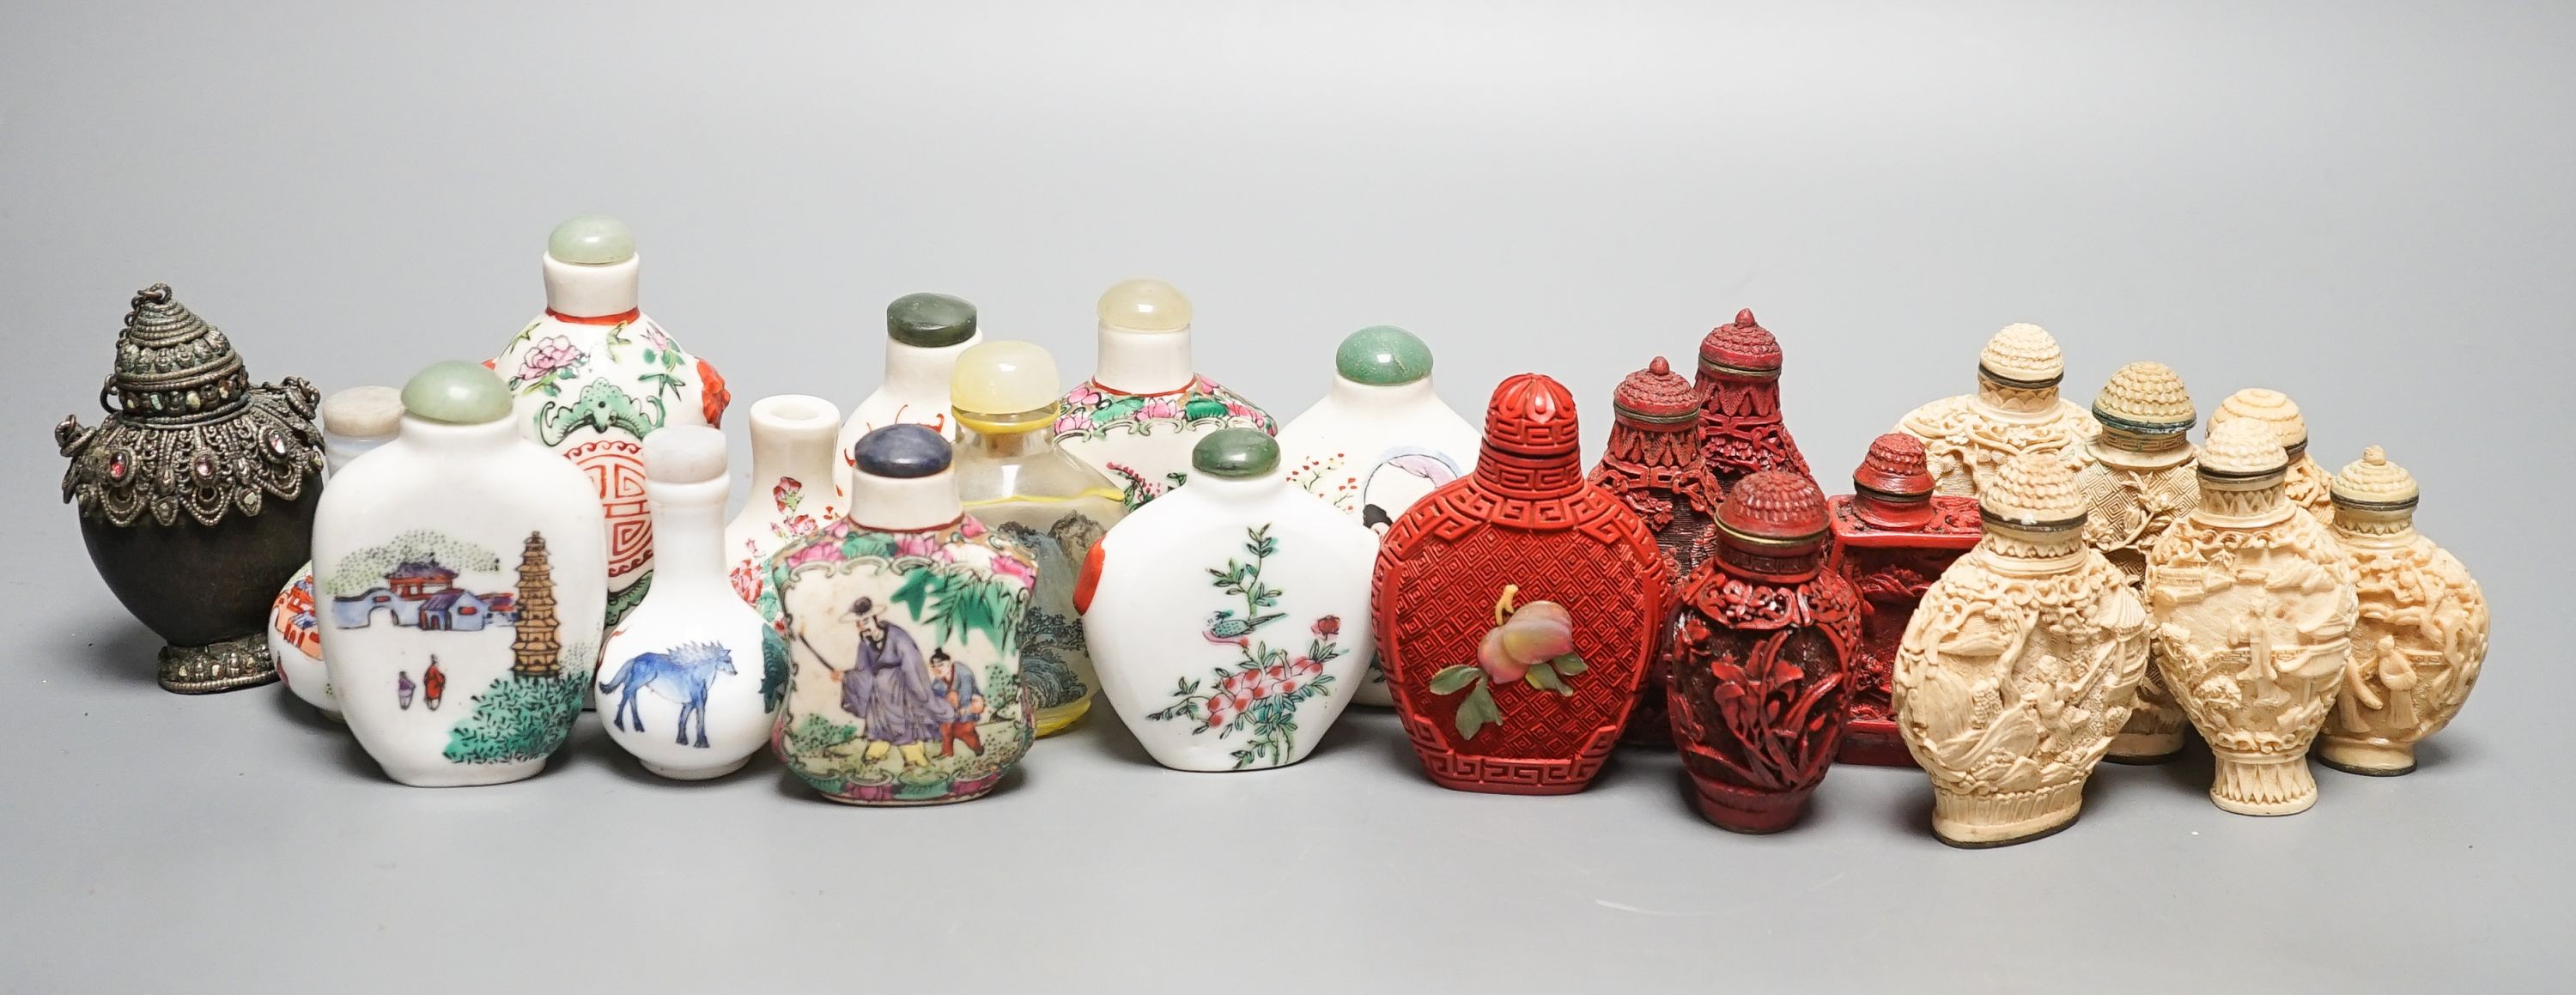 A collection of Chinese snuff bottles, 20th century, including a carved cinnabar lacquer and hardstone inlaid snuff bottle, 7.4cm (23)